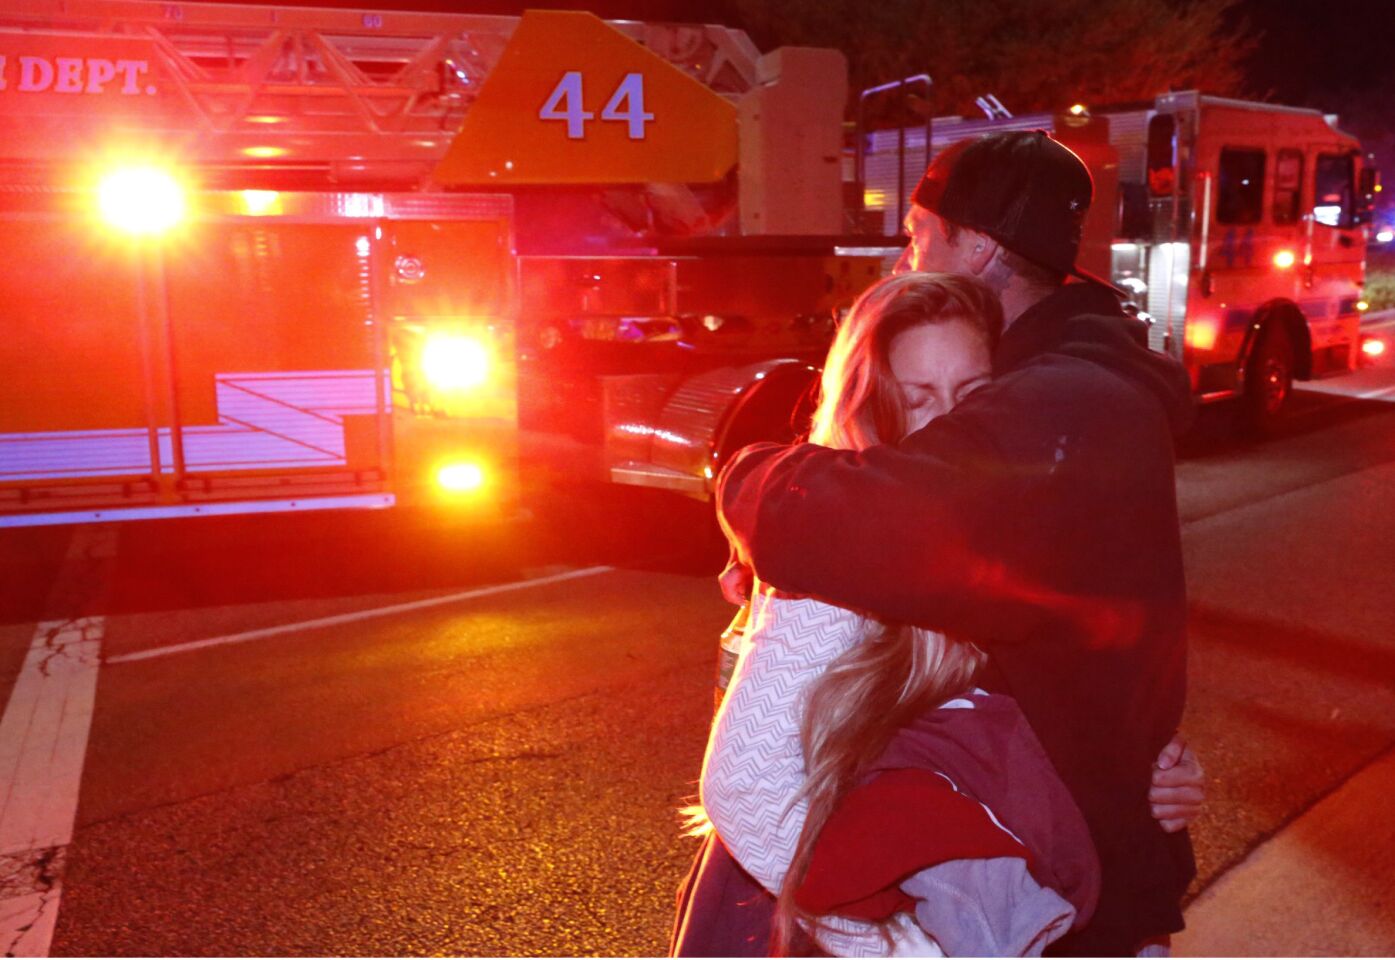 Molly Esterline and David Crawford comfort each other after the shooting.